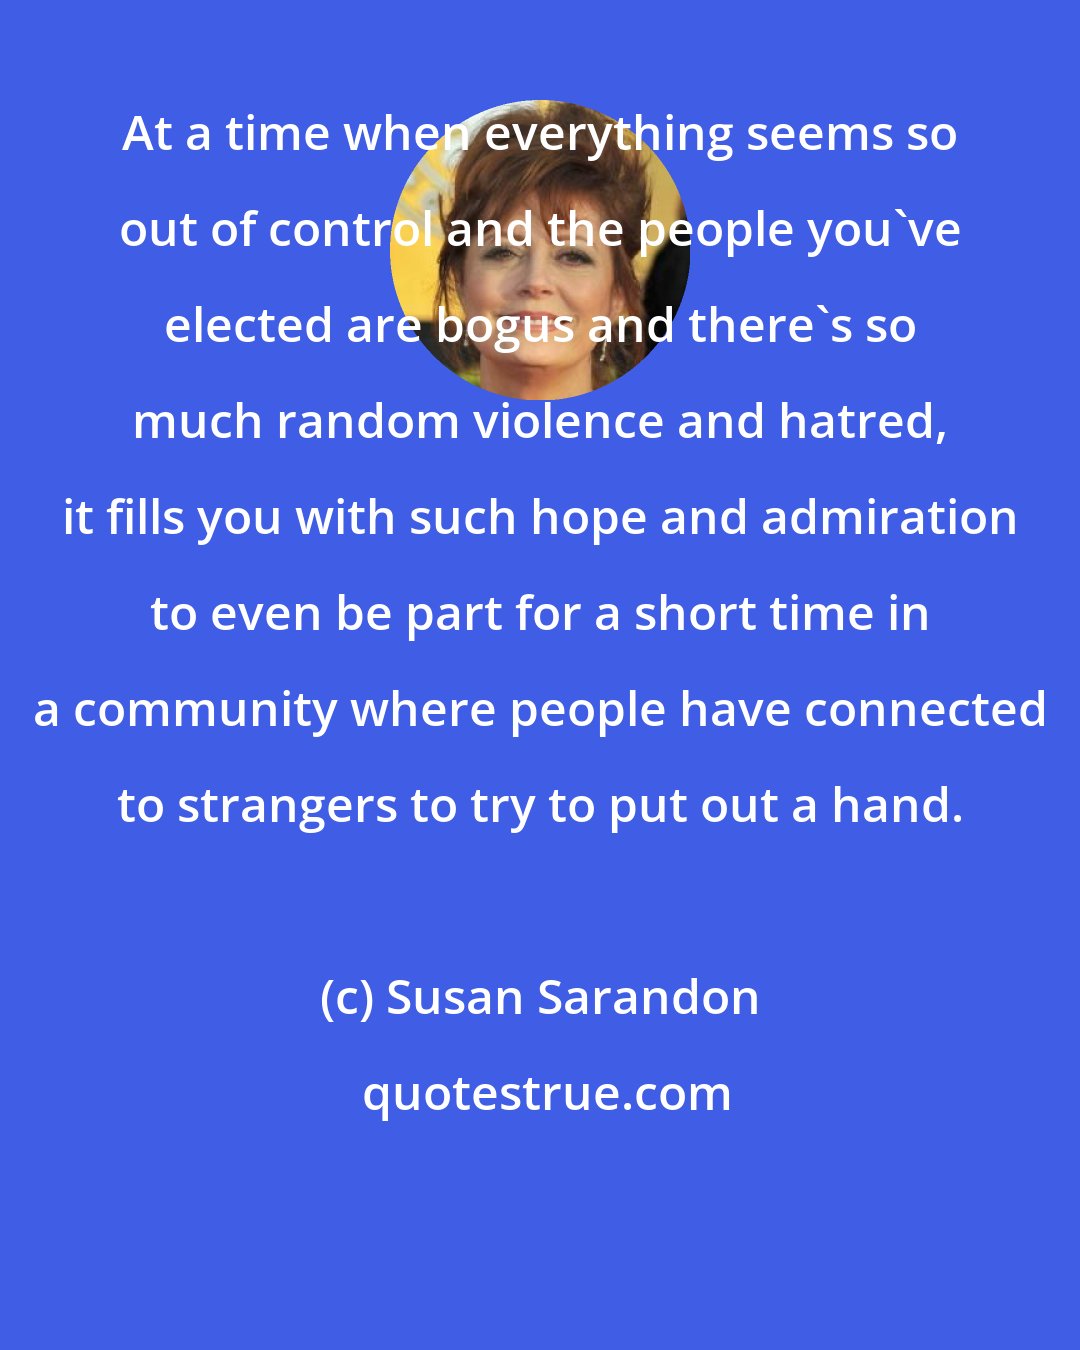 Susan Sarandon: At a time when everything seems so out of control and the people you've elected are bogus and there's so much random violence and hatred, it fills you with such hope and admiration to even be part for a short time in a community where people have connected to strangers to try to put out a hand.